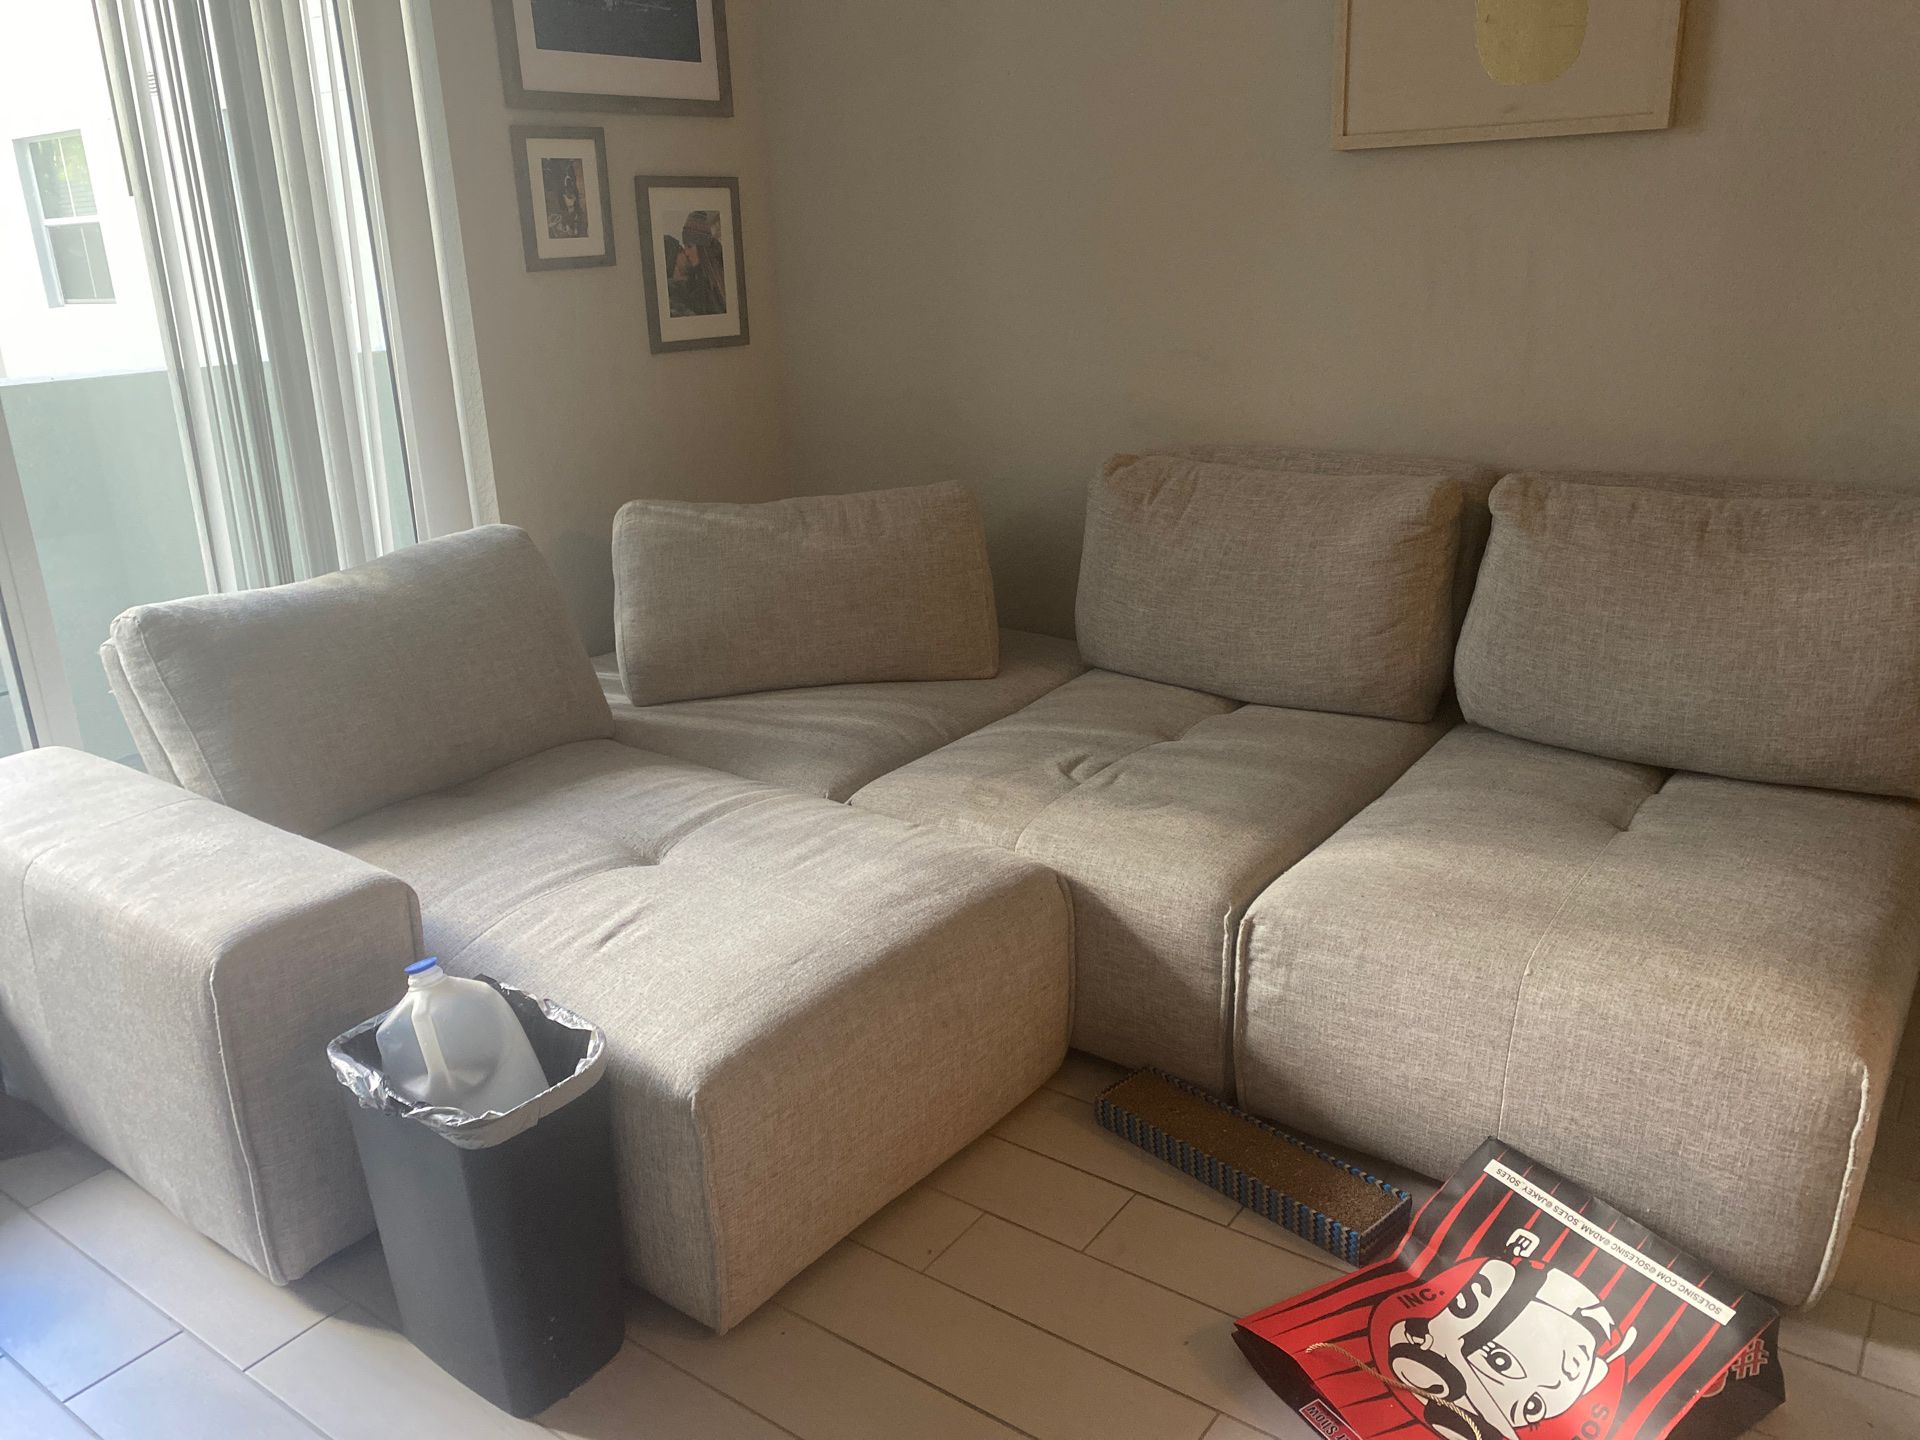 BEIGE/GREY COUCH FOR SALE